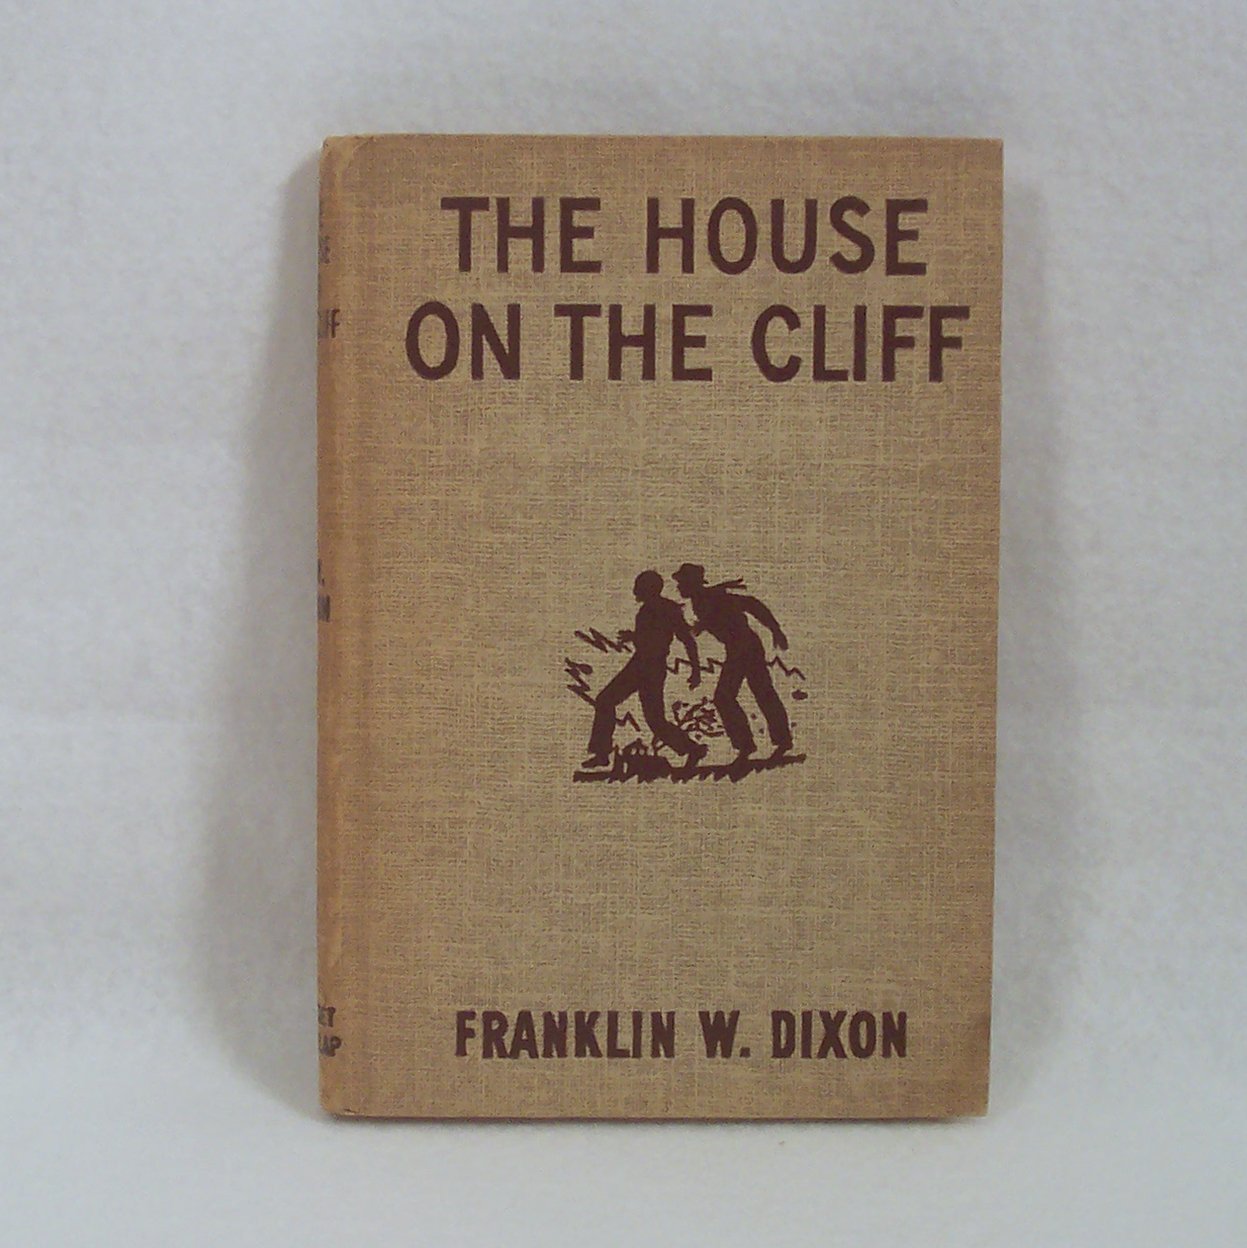 The House on the Cliff by Franklin W. Dixon